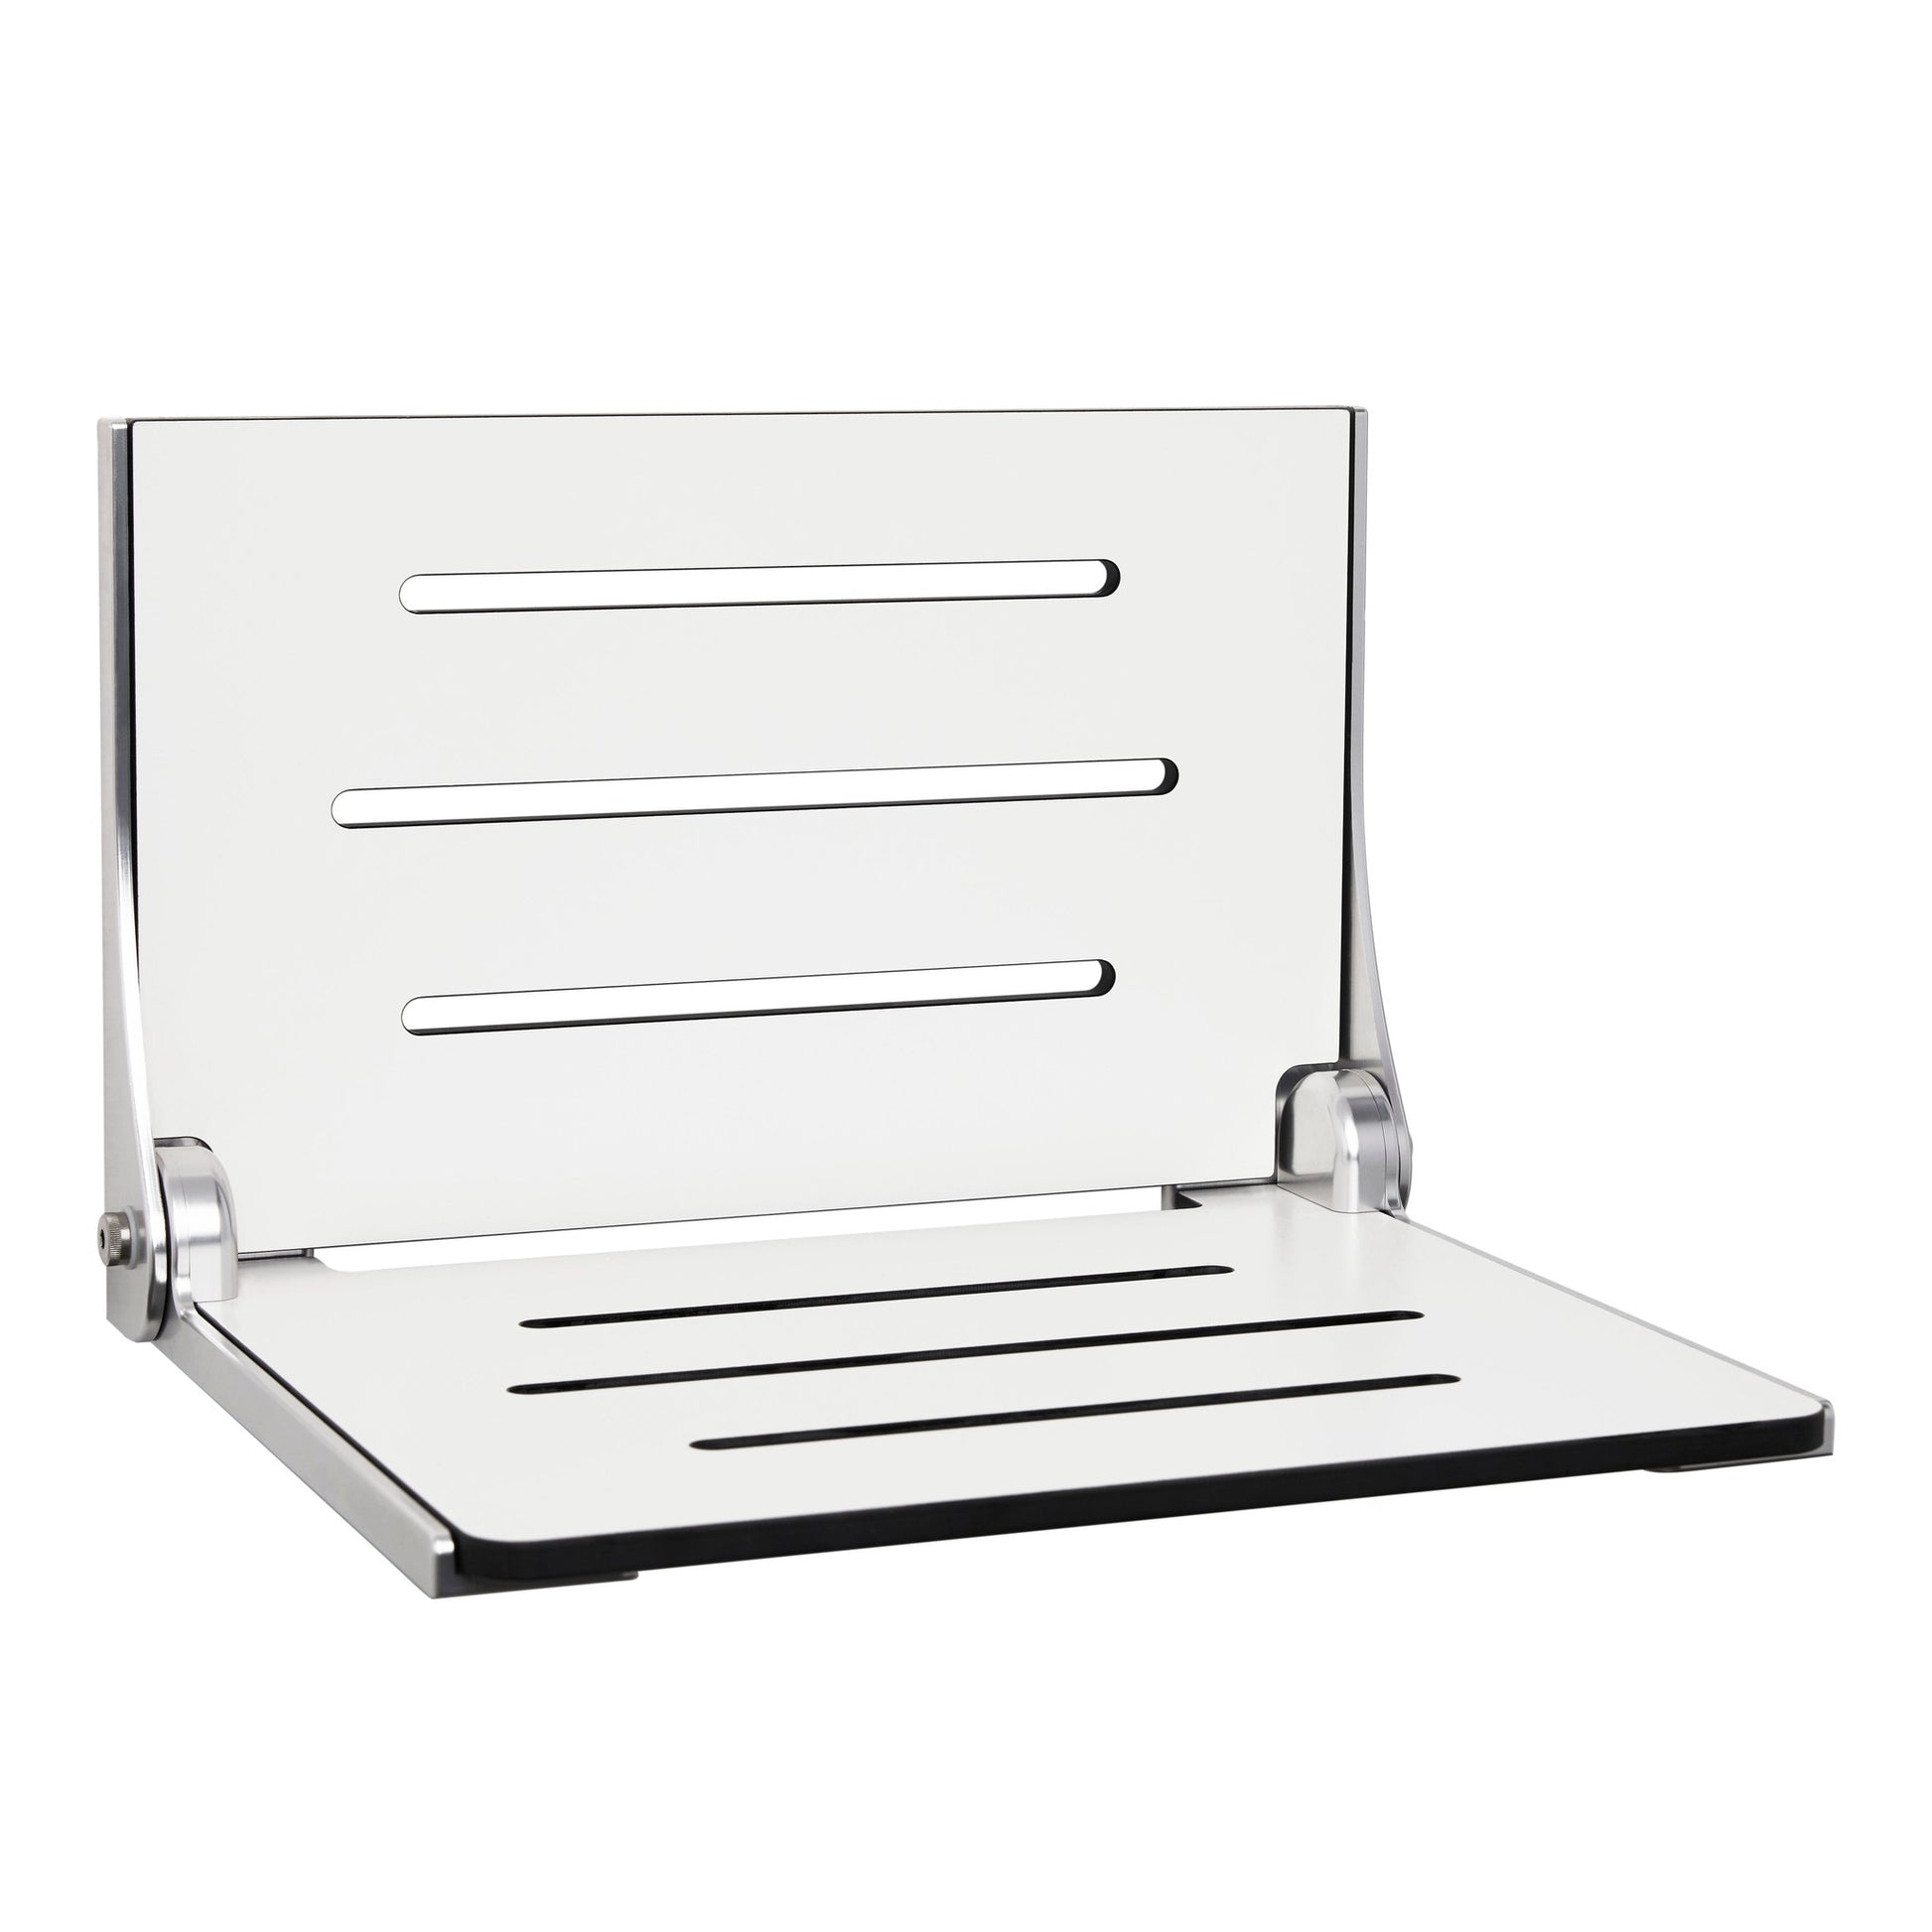 Seachrome Silhouette 19" Phenolic White Seat Top and Silver Frame Wall Mounted High Back Shower Seat